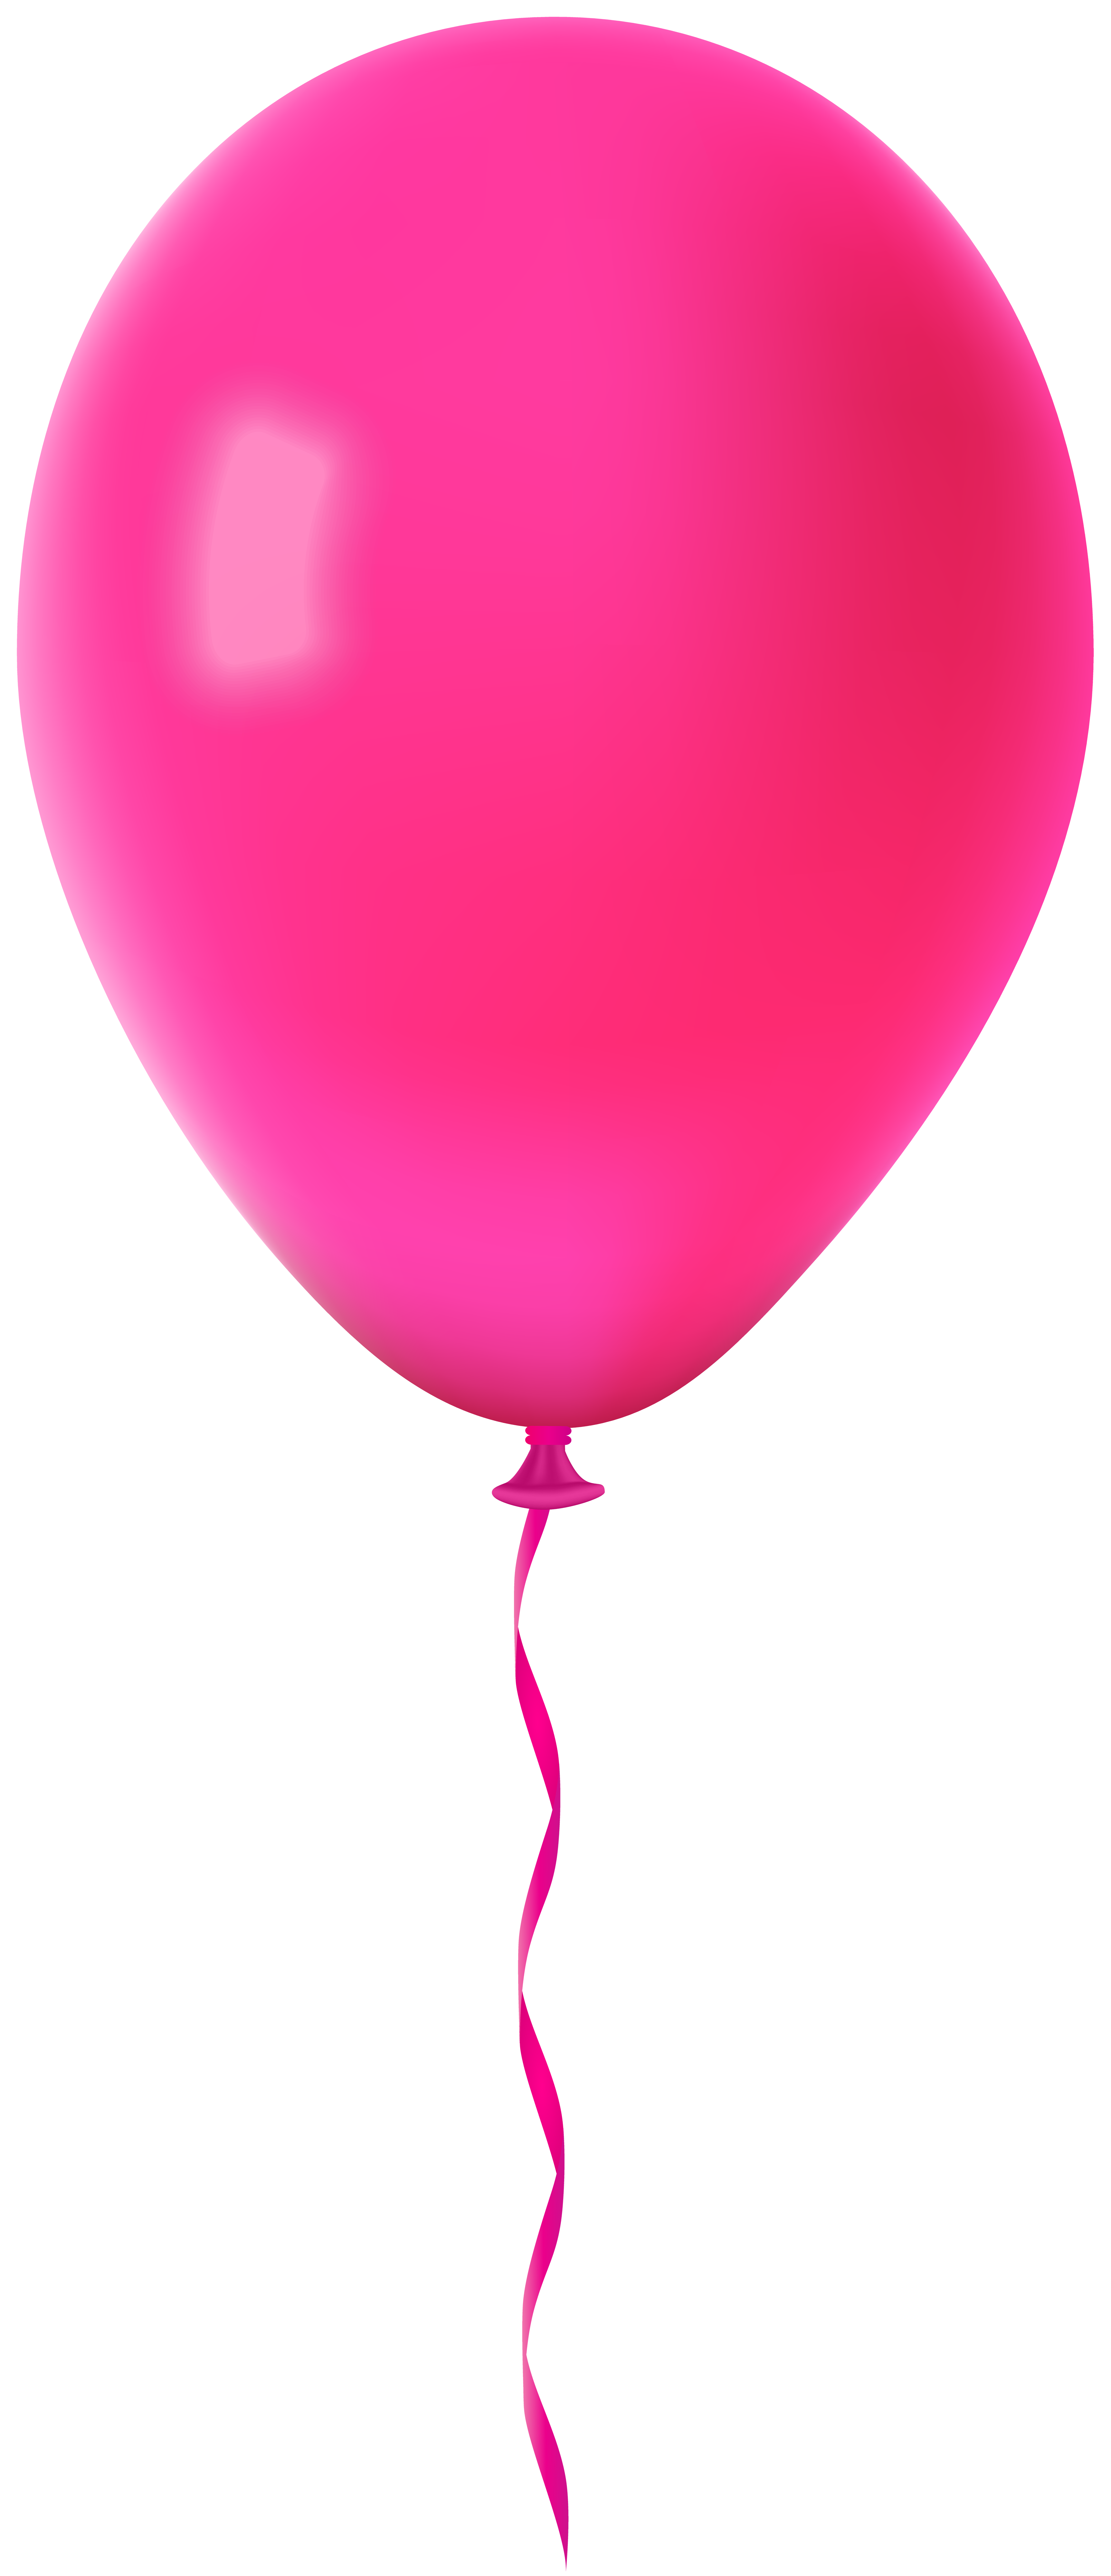 Clipart Pink Balloons